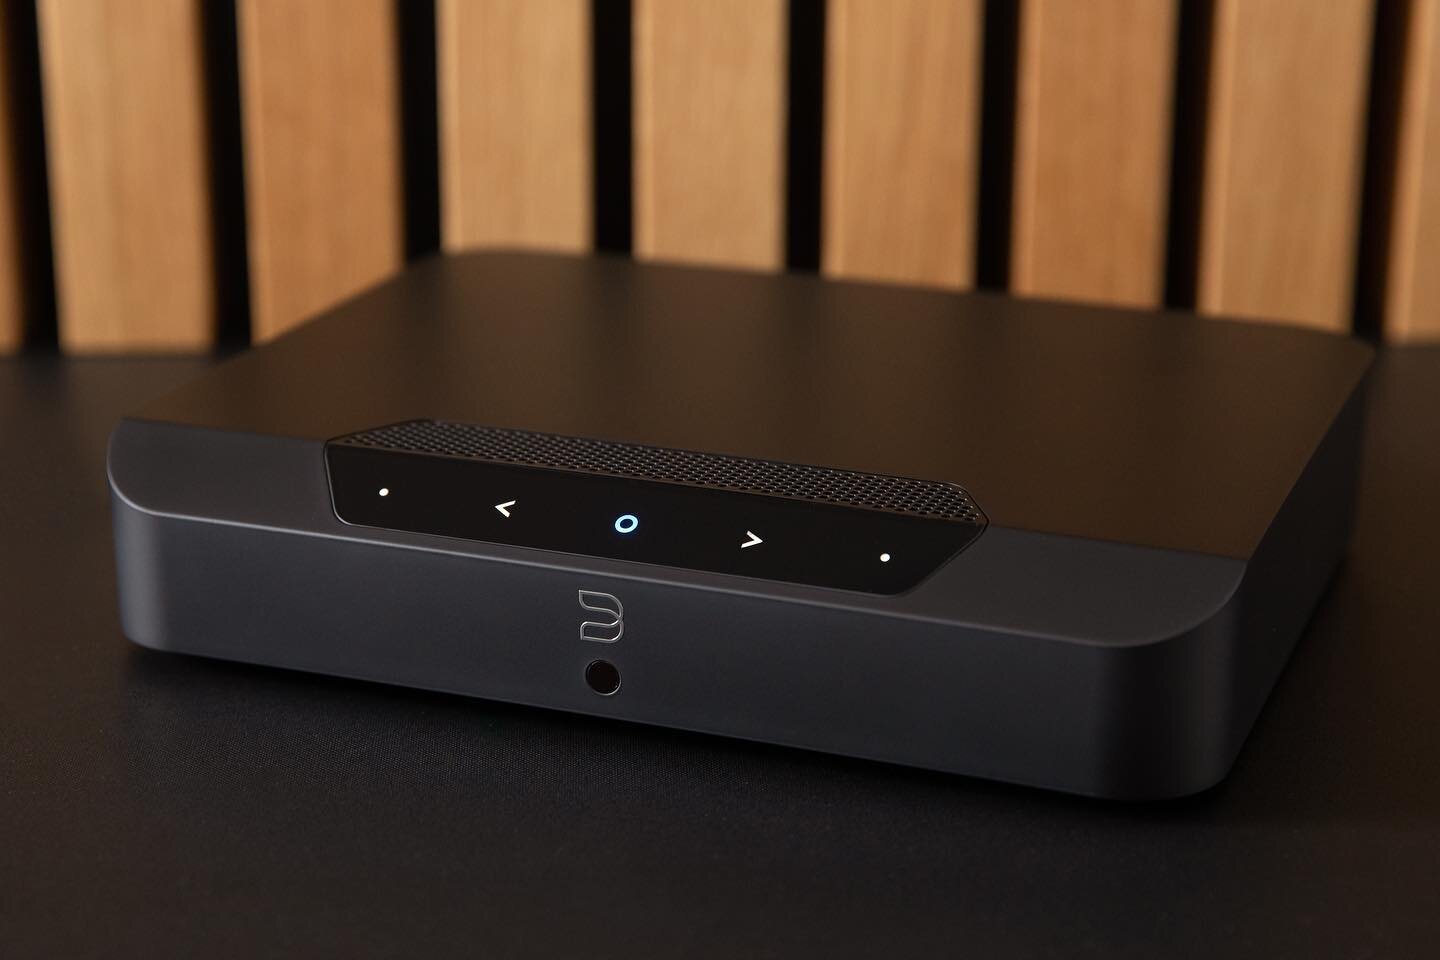 &ldquo;Just Add Speakers&rdquo; - The BlueSound Powernode Edge is the perfect all in one HIFI amplifier and streamer. It even features HDMI eARC to take your TV sound to the next level. #bluesound #yeg #yegbusiness #hifi #hifiaudio